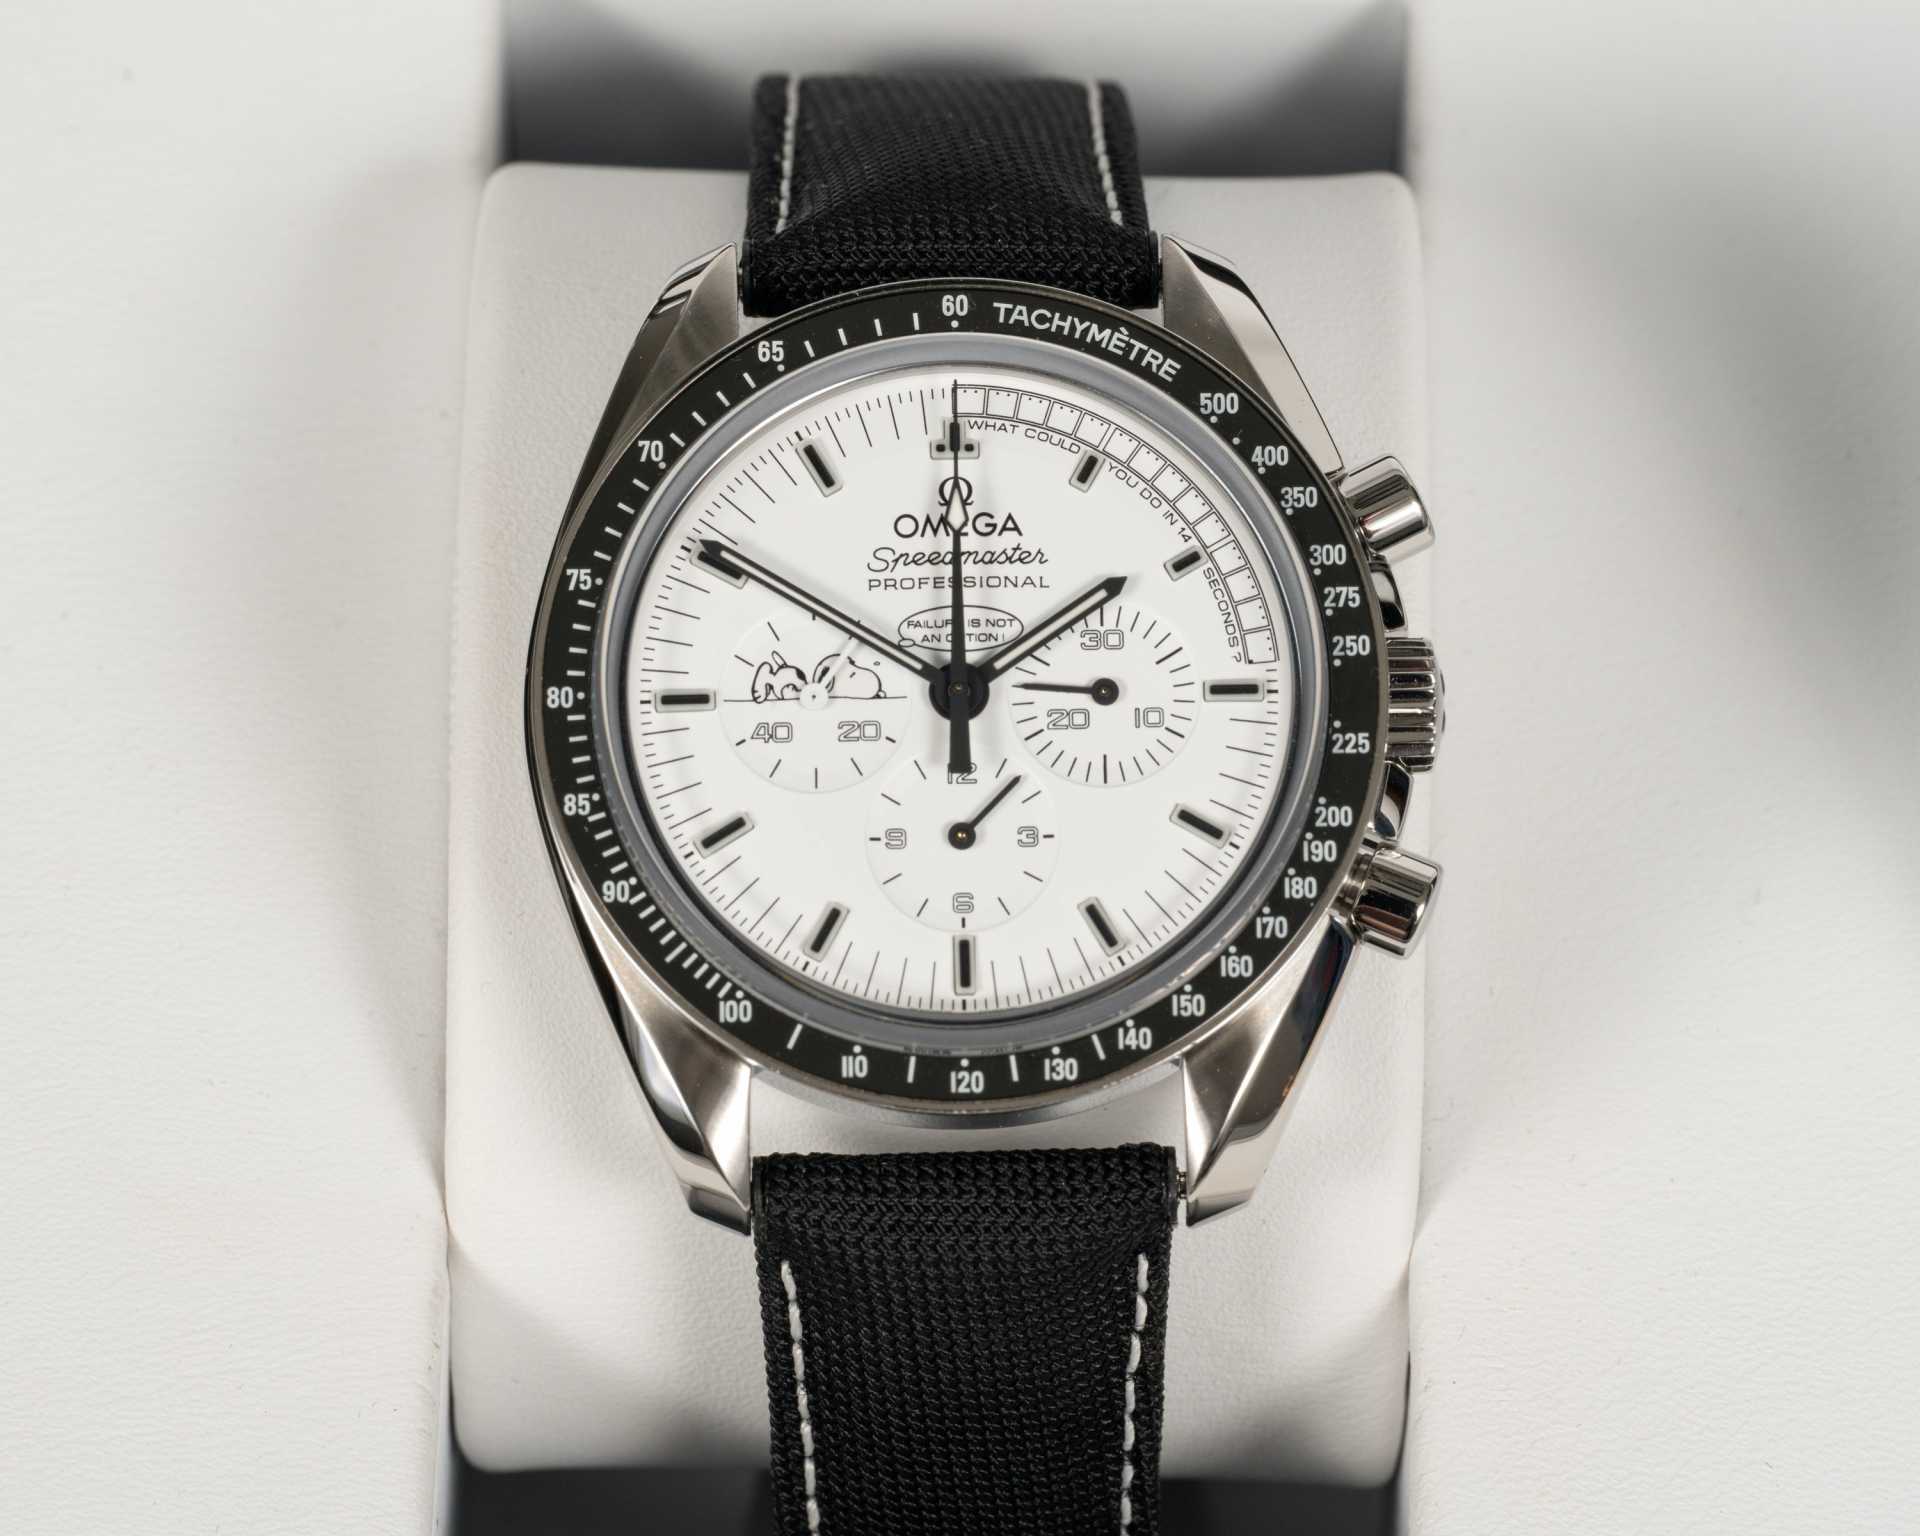 2015 Omega Speedmaster, Apollo 13 Anniversary Watch. Affectionately known as Omega 'Snoopy'.